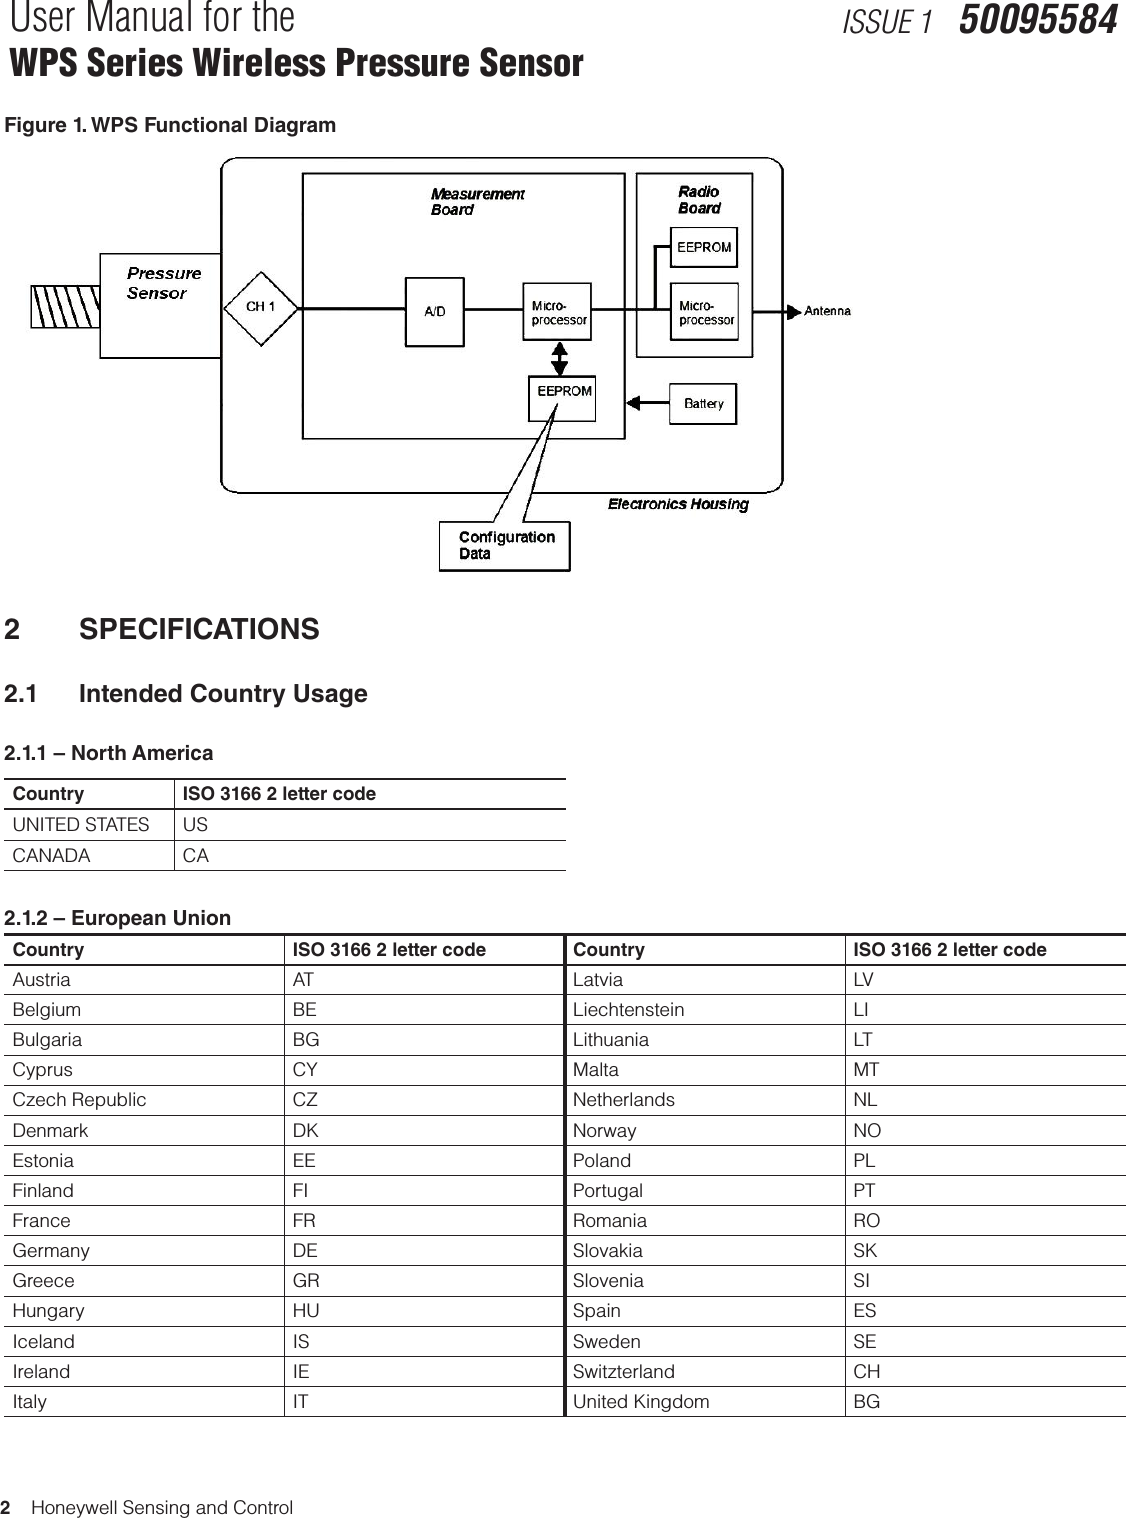 2    Honeywell Sensing and ControlUser Manual for the WPS Series Wireless Pressure SensorISSUE 1   50095584Figure 1. WPS Functional Diagram2 SPECIFICATIONS2.1  Intended Country Usage2.1.1 – North AmericaCountry ISO 3166 2 letter codeUNITED STATES USCANADA CA2.1.2 – European UnionCountry  ISO 3166 2 letter code Country  ISO 3166 2 letter codeAustria AT Latvia LVBelgium BE Liechtenstein LIBulgaria BG Lithuania LTCyprus CY Malta MTCzech Republic CZ Netherlands NLDenmark DK Norway NOEstonia EE Poland PLFinland FI Portugal PTFrance FR Romania ROGermany DE Slovakia SKGreece GR Slovenia SIHungary HU Spain ESIceland IS Sweden SEIreland IE Switzterland CHItaly IT United Kingdom BG